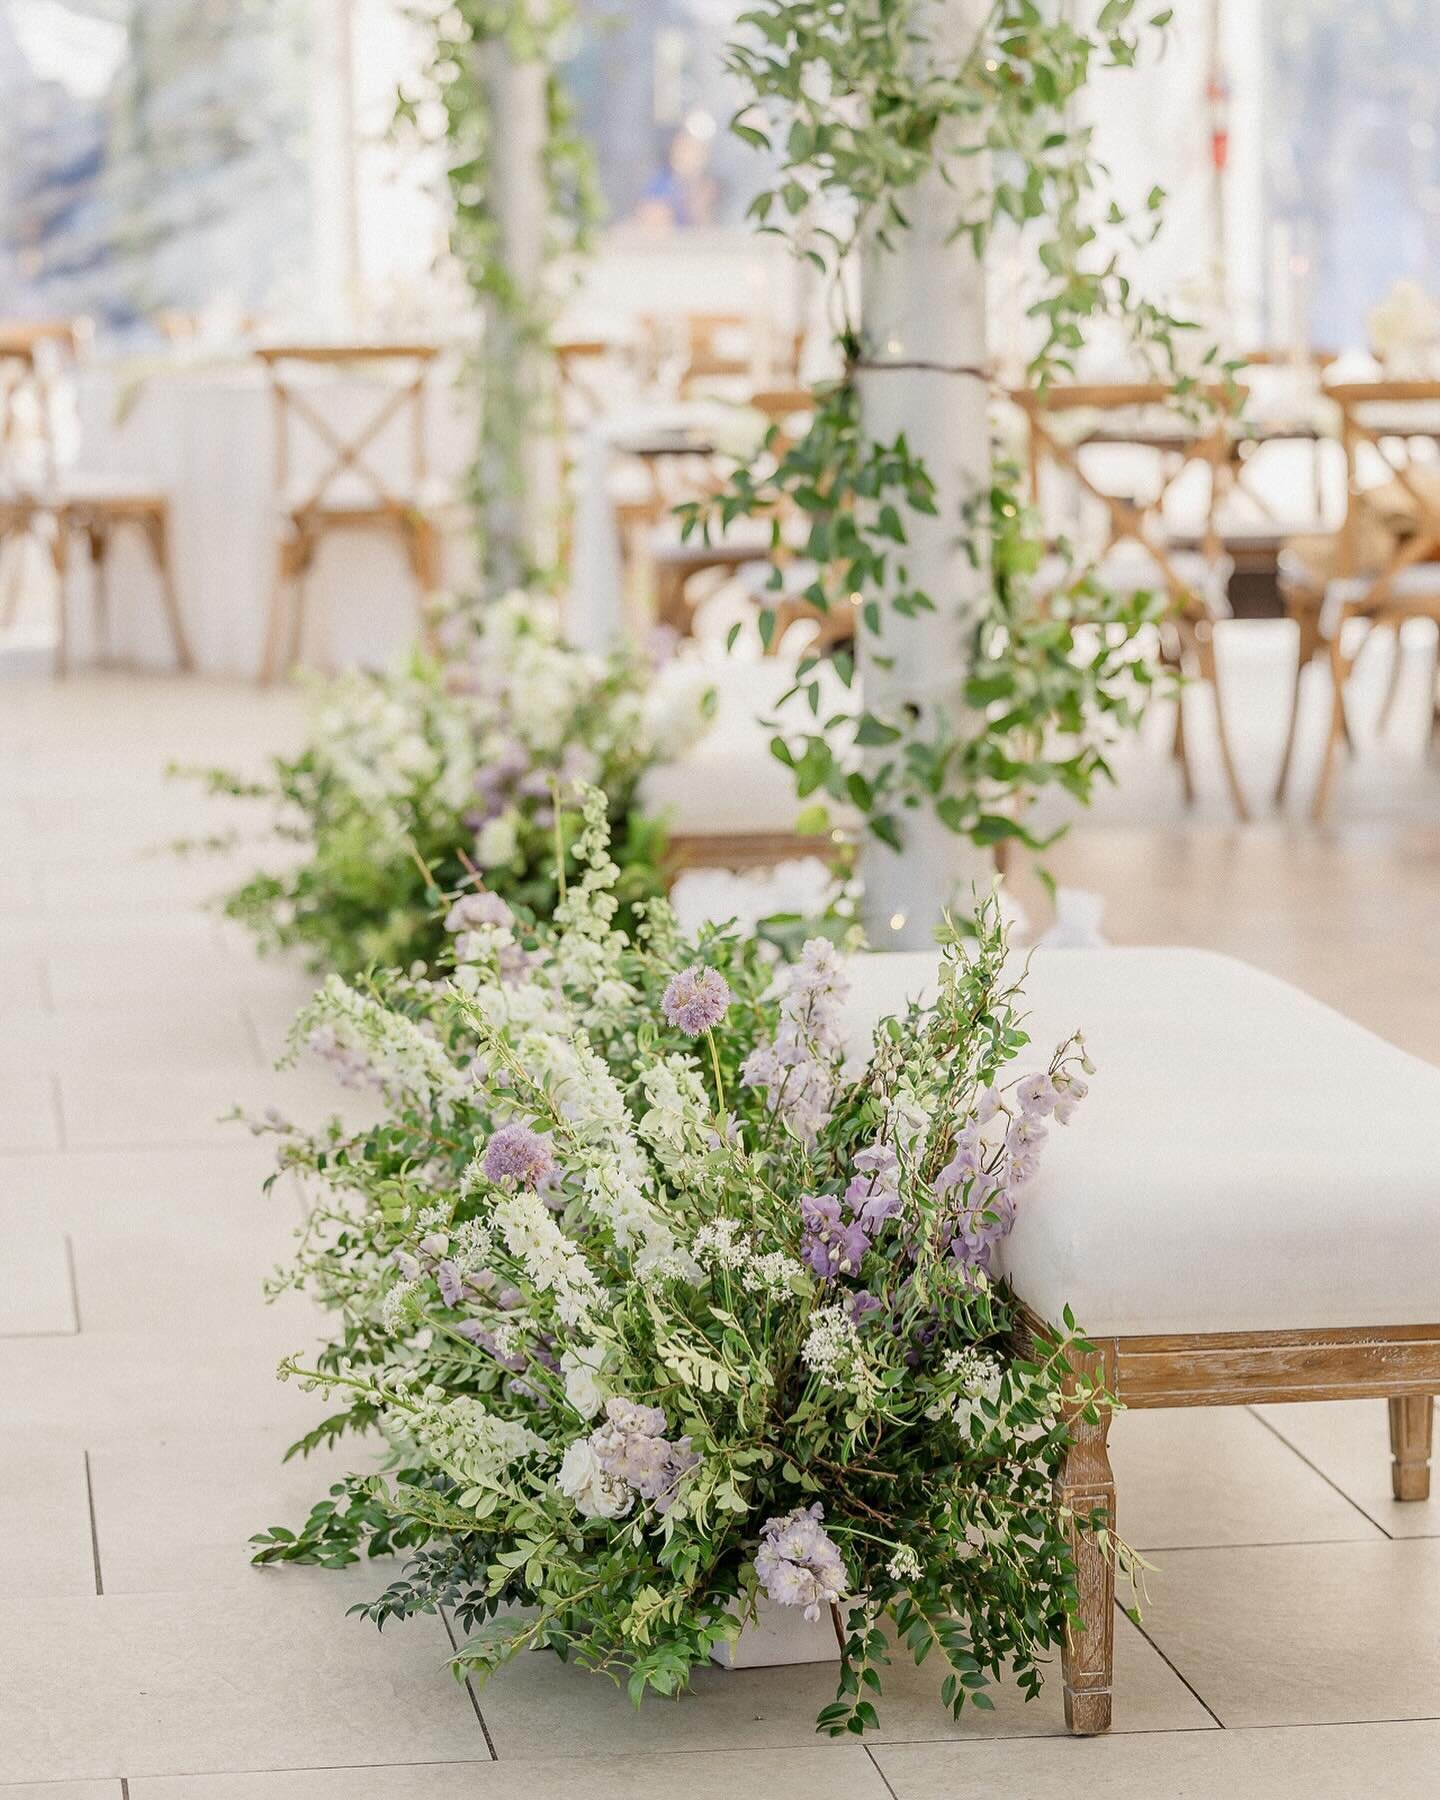 🌸TIP! A few beautiful ways to repurpose ceremony spray florals into your reception space are:
.
🌸Near the dance floor by guest seating so the beauty can be viewed all night!
.
🌸 In front of your sweetheart or head table!
.
🌸By your cake table to 